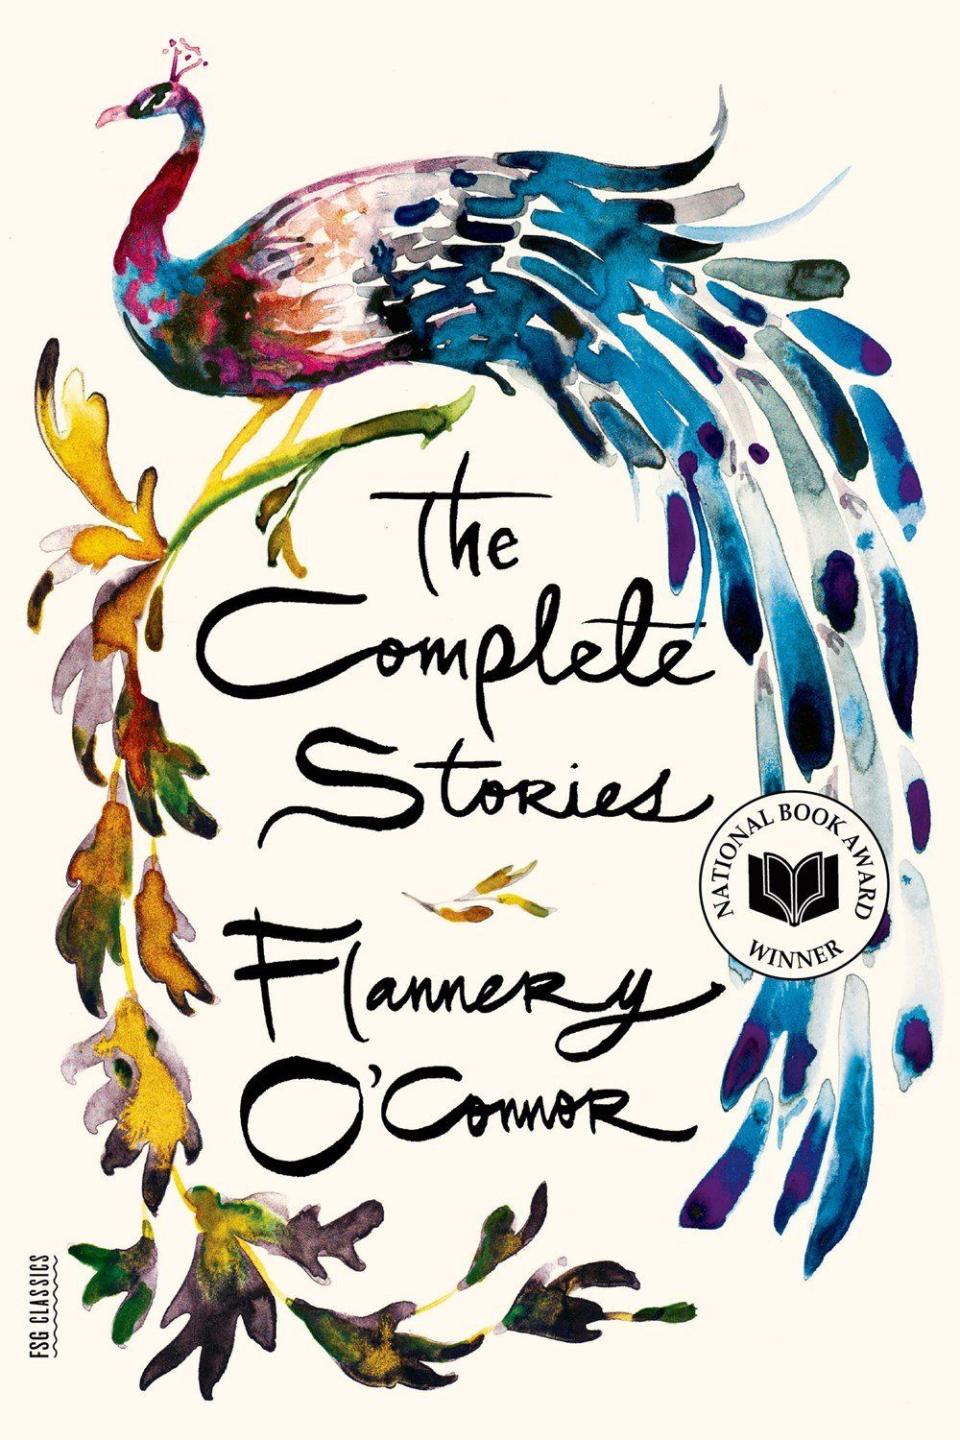 The Complete Stories by Flannery O’Connor